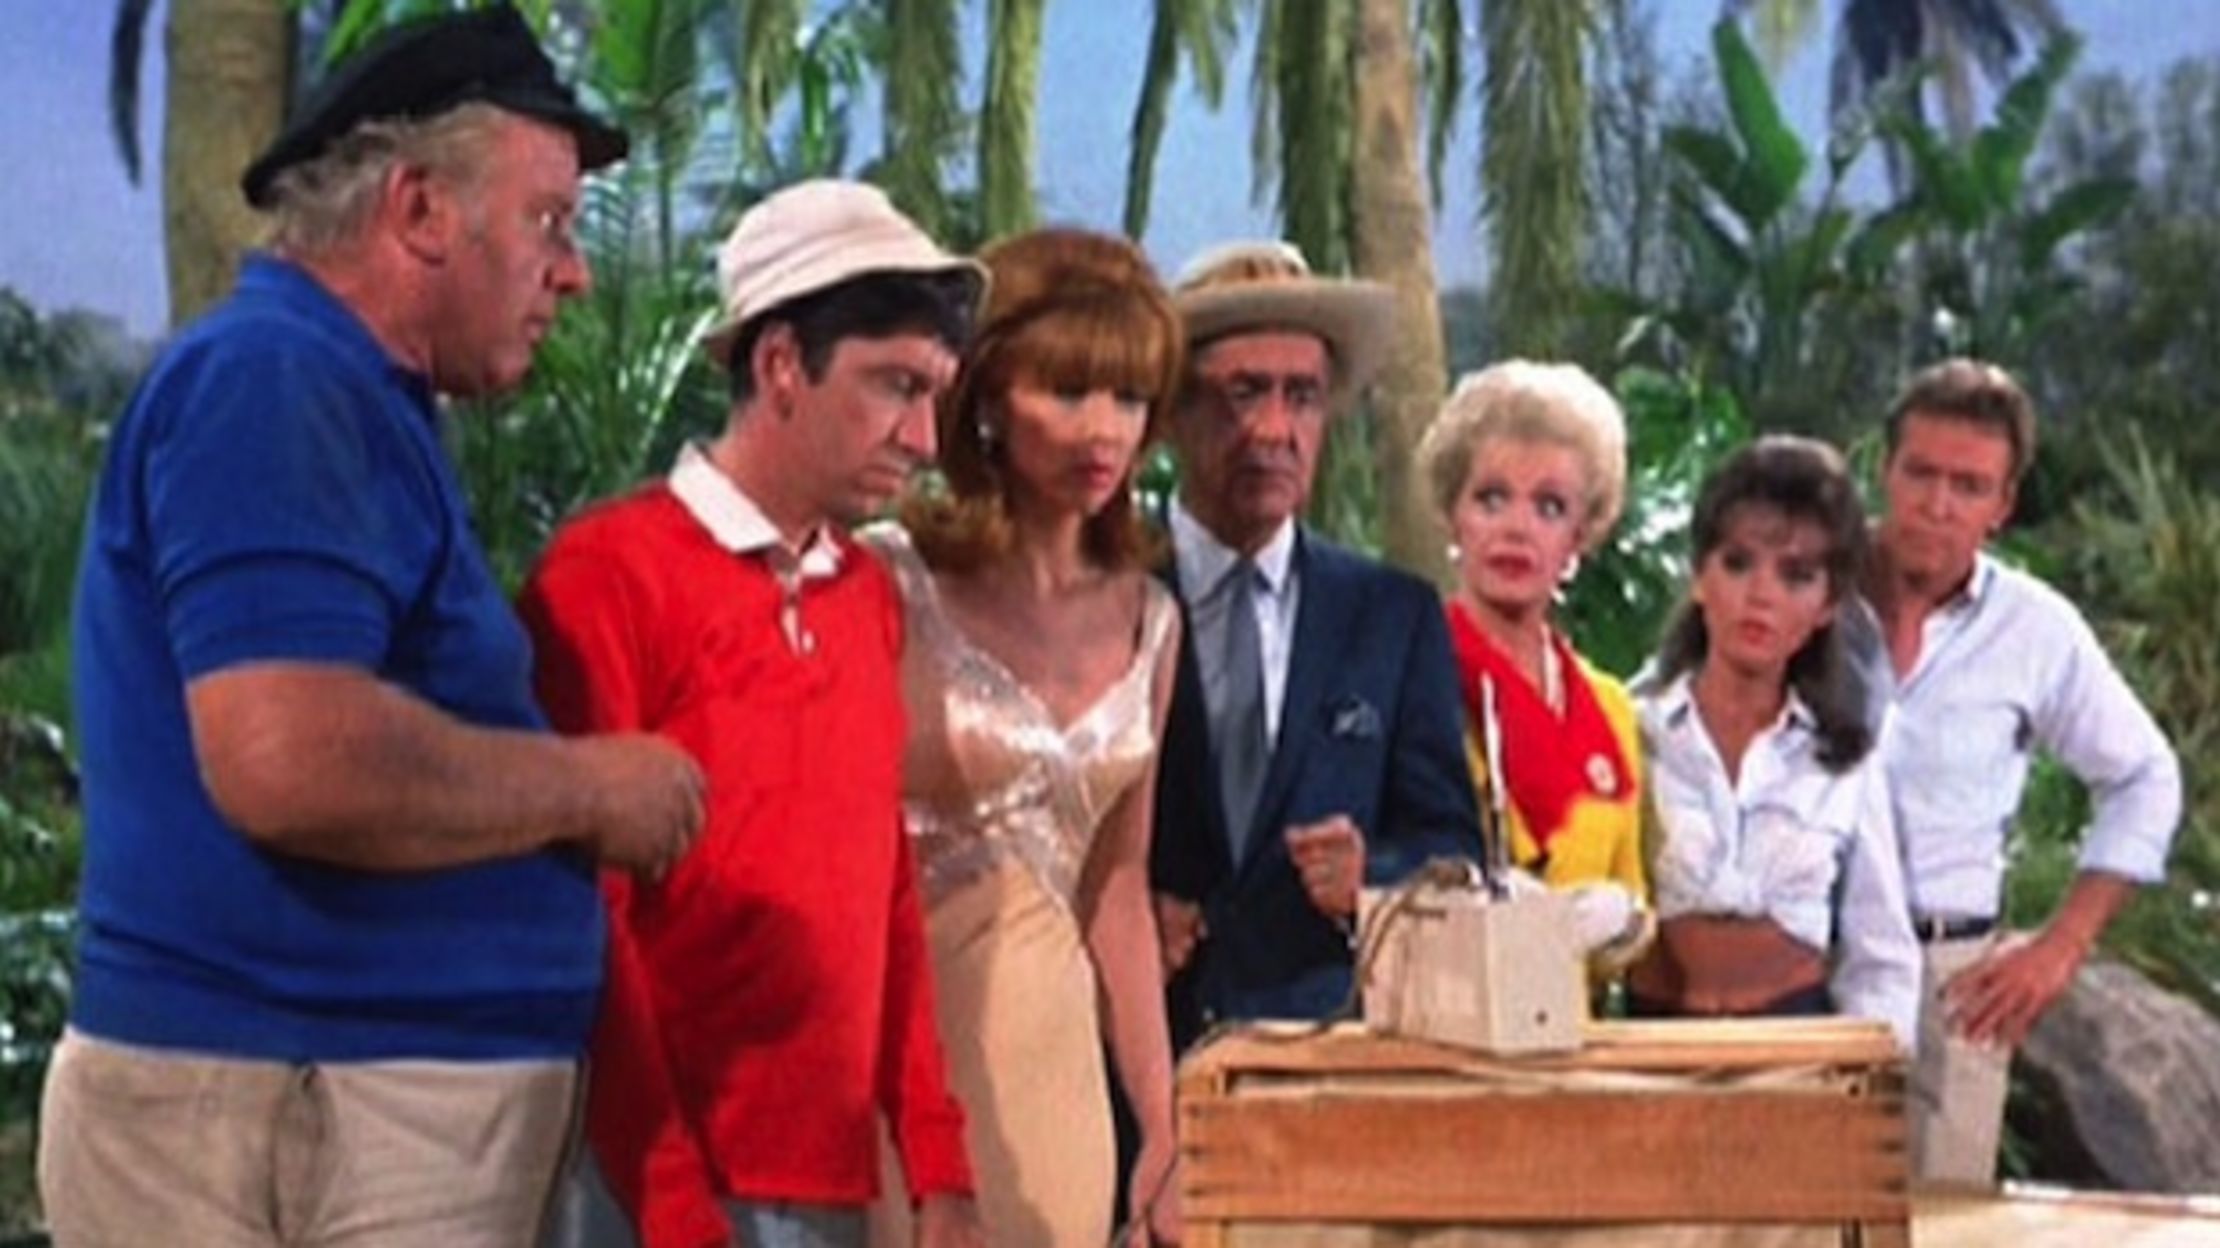 mentalfloss.com - The 98th—and final—episode of Gilligan’s Island was broad...